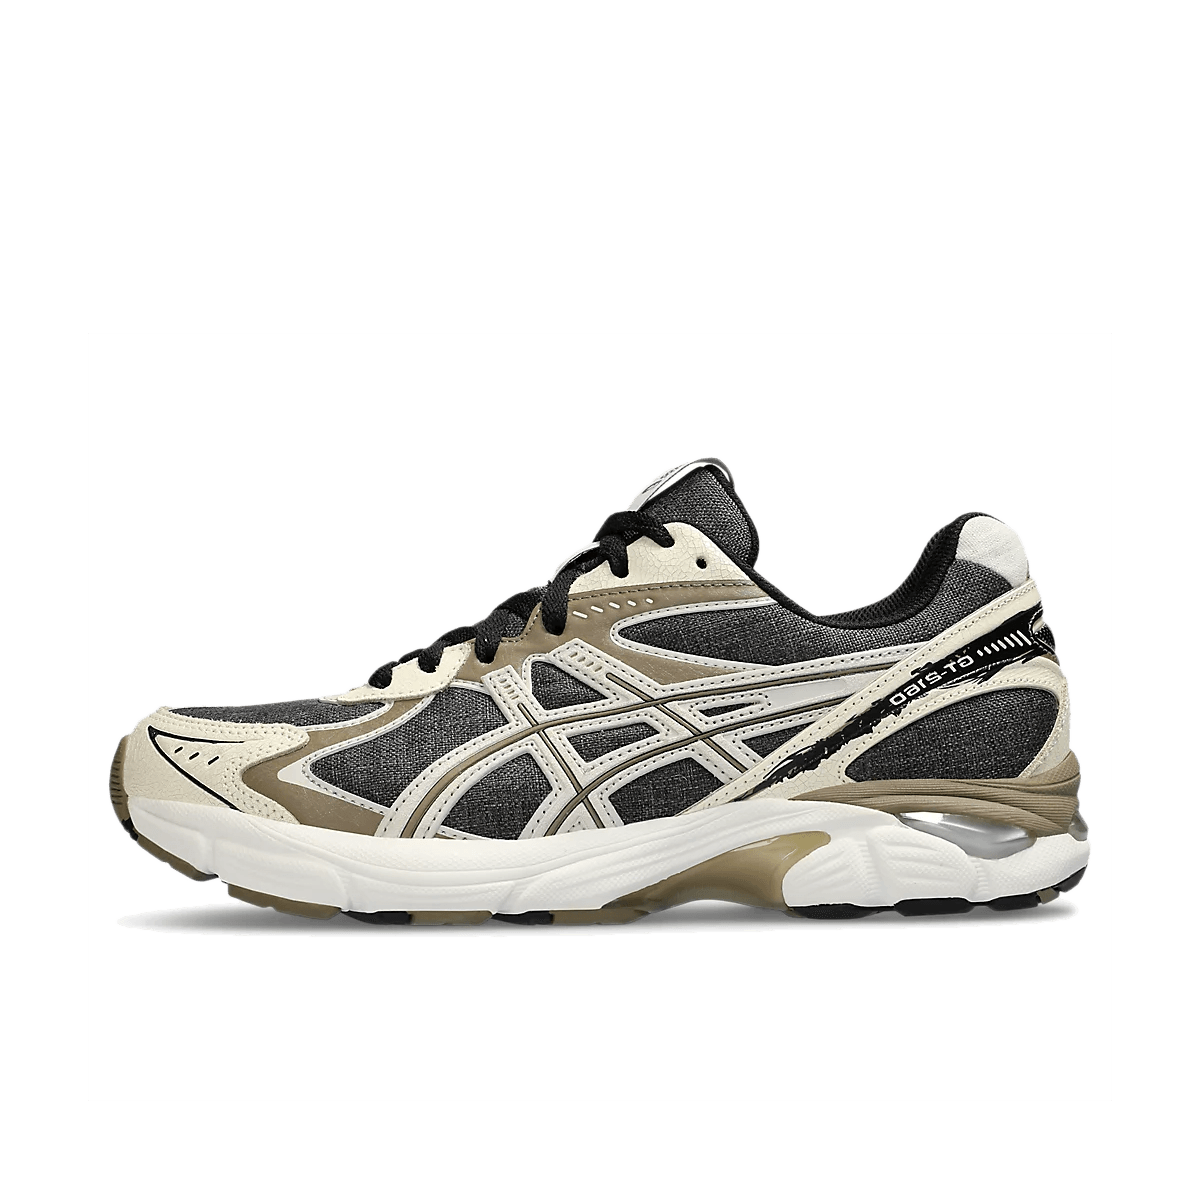 Asics GT-2160 'Black & Cream' - Imperfection Pack 1203A415-001